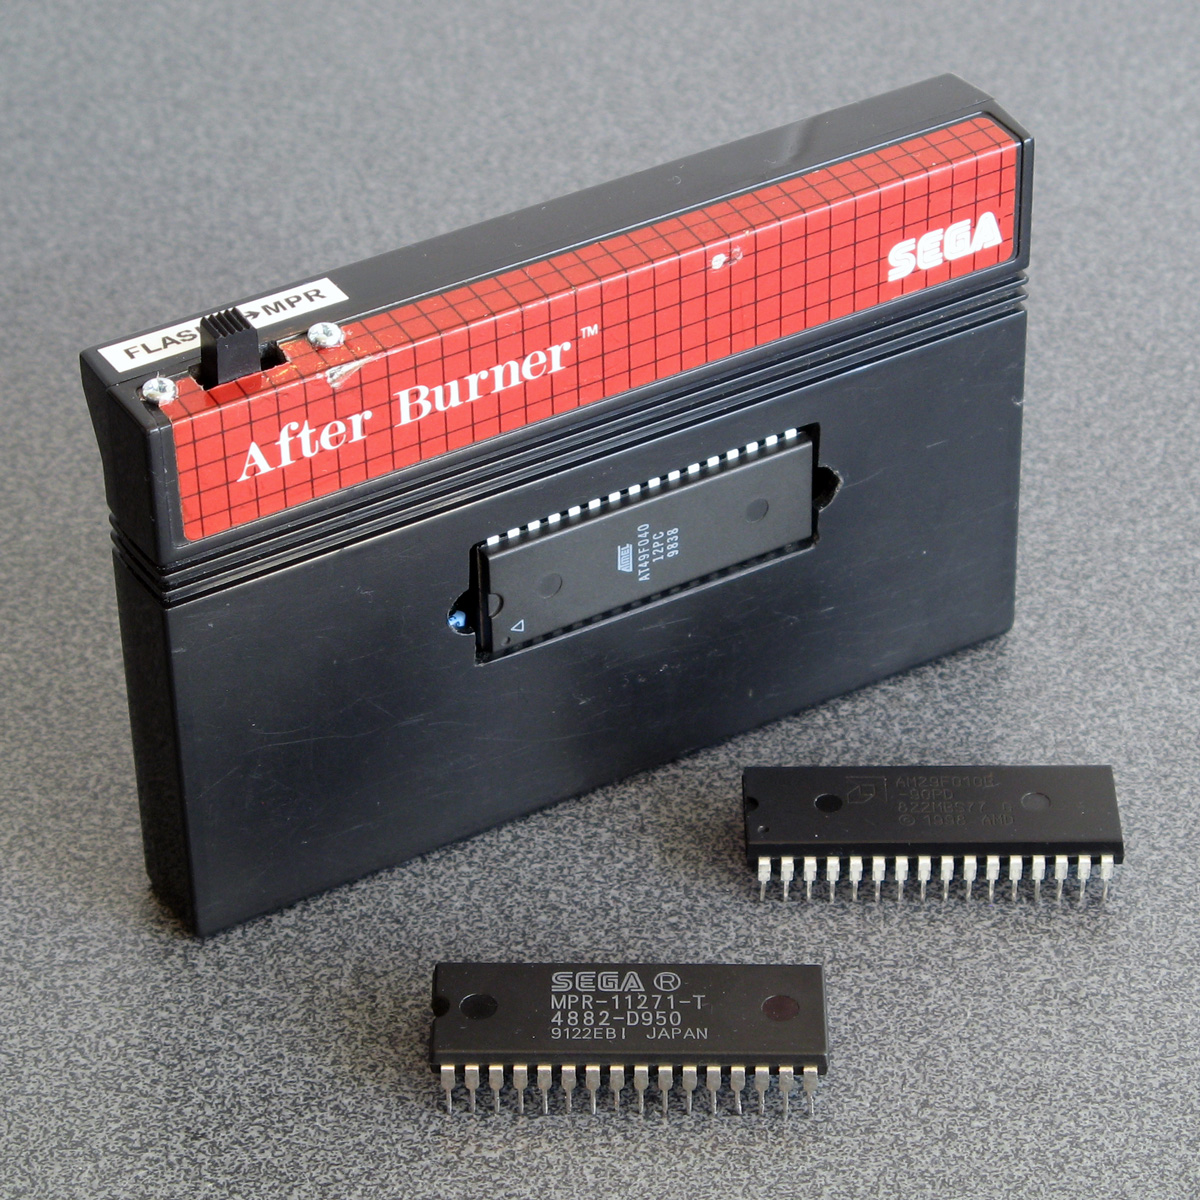 Modifying a Master System cartridge for use with flash ROMs